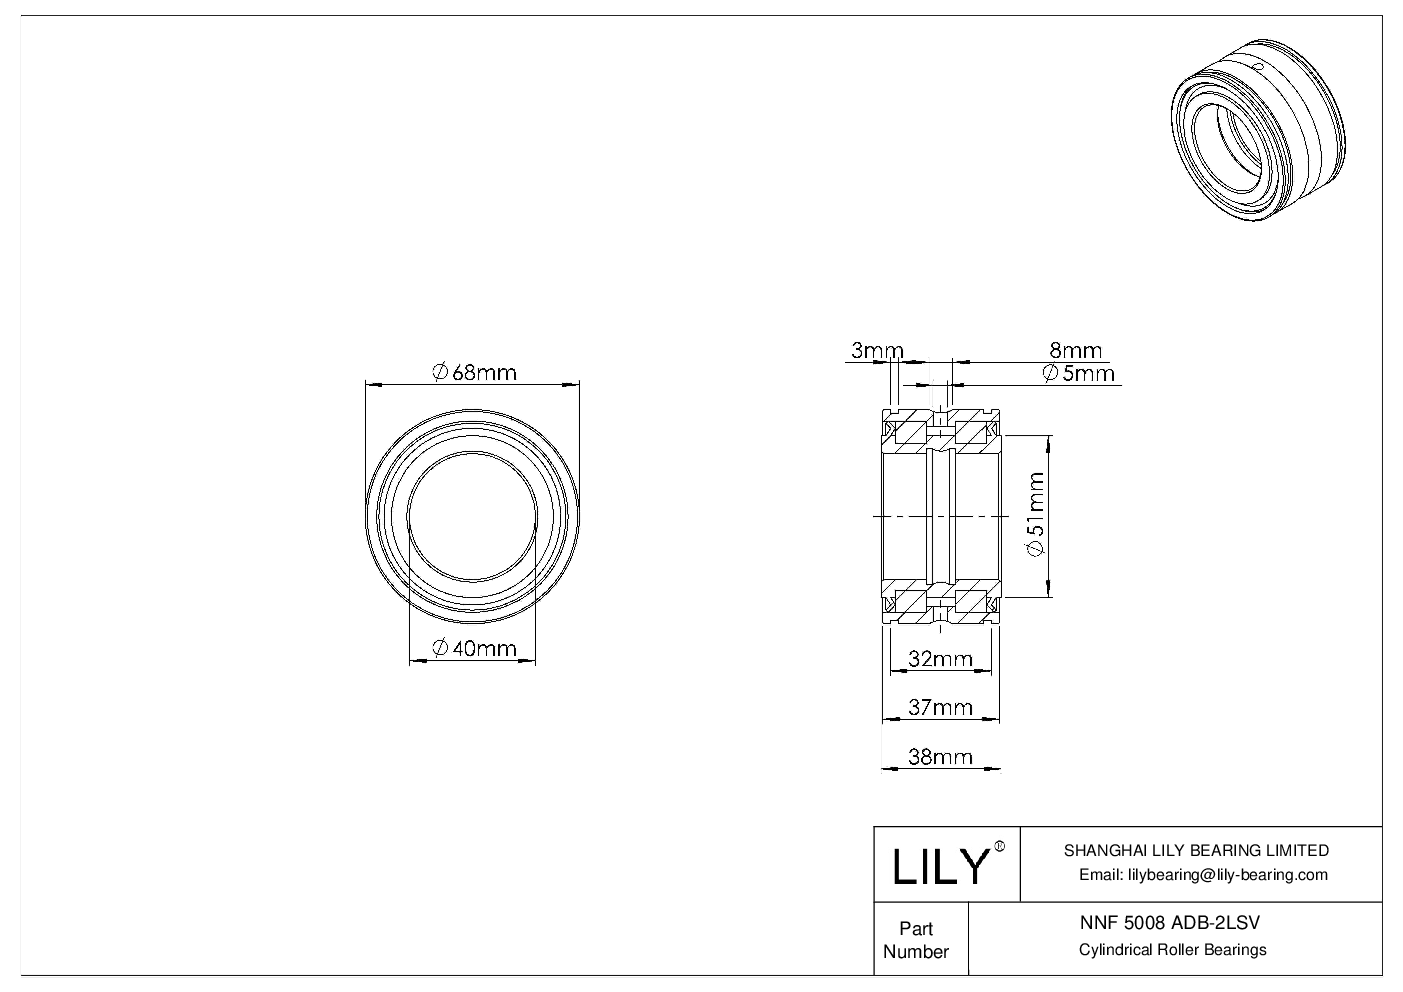 NNF 5008 ADB-2LSV Double Row Full Complement Cylindrical Roller Bearings cad drawing